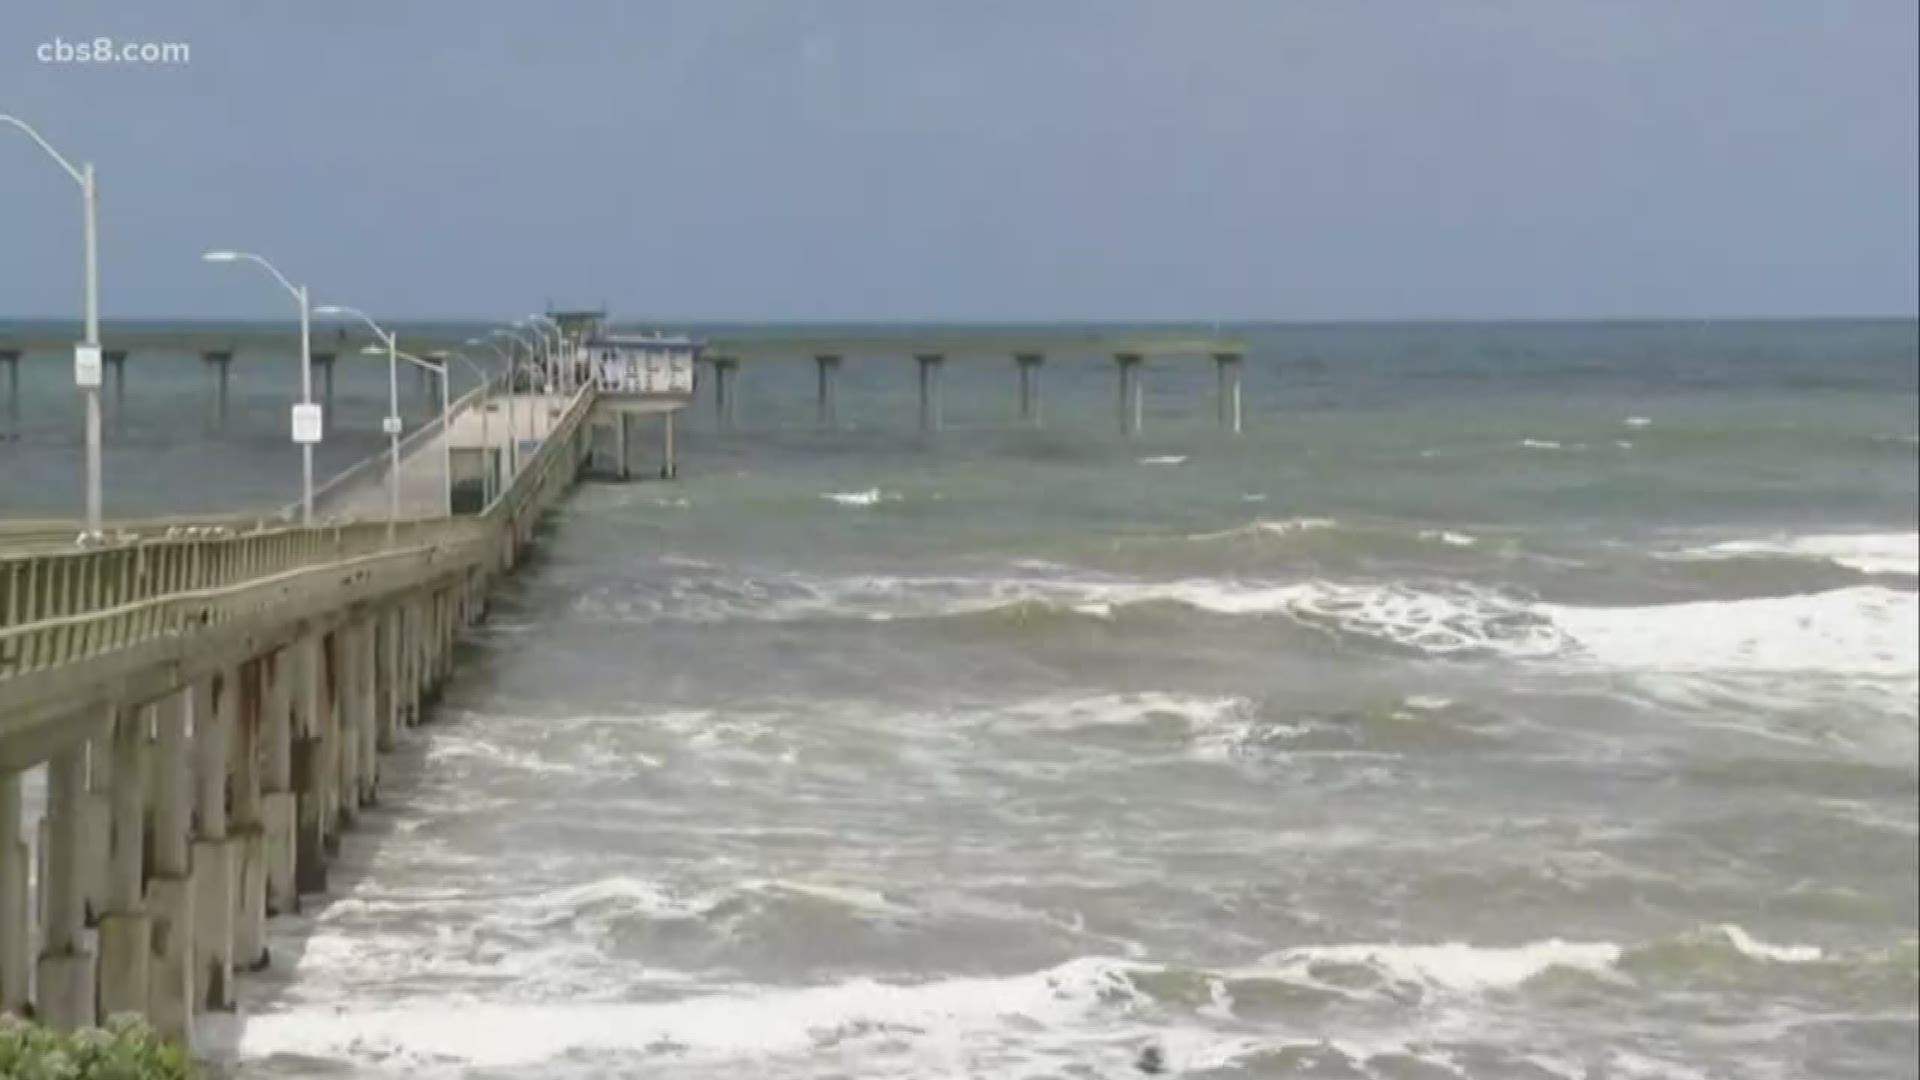 Construction crews say they have high hopes the Ocean Beach Pier will reopen on Thursday in time for Memorial Day weekend.